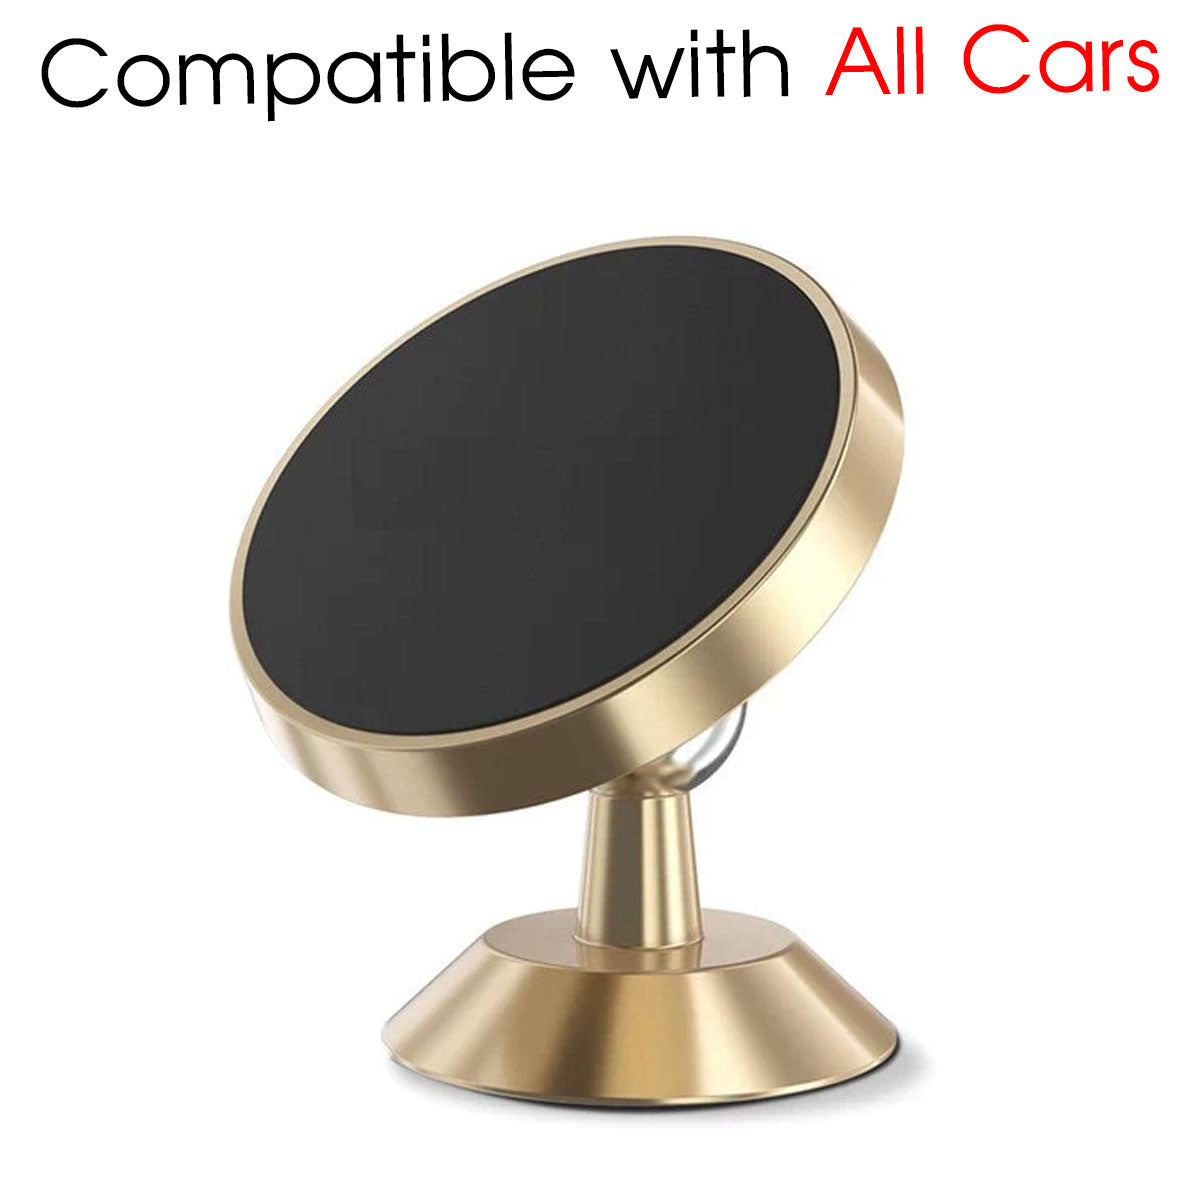 [2 Pack ] Magnetic Phone Mount, Custom For Your Cars, [ Super Strong Magnet ] [ with 4 Metal Plate ] car Magnetic Phone Holder, [ 360° Rotation ] Universal Dashboard car Mount Fits All Cell Phones, Car Accessories MT13982